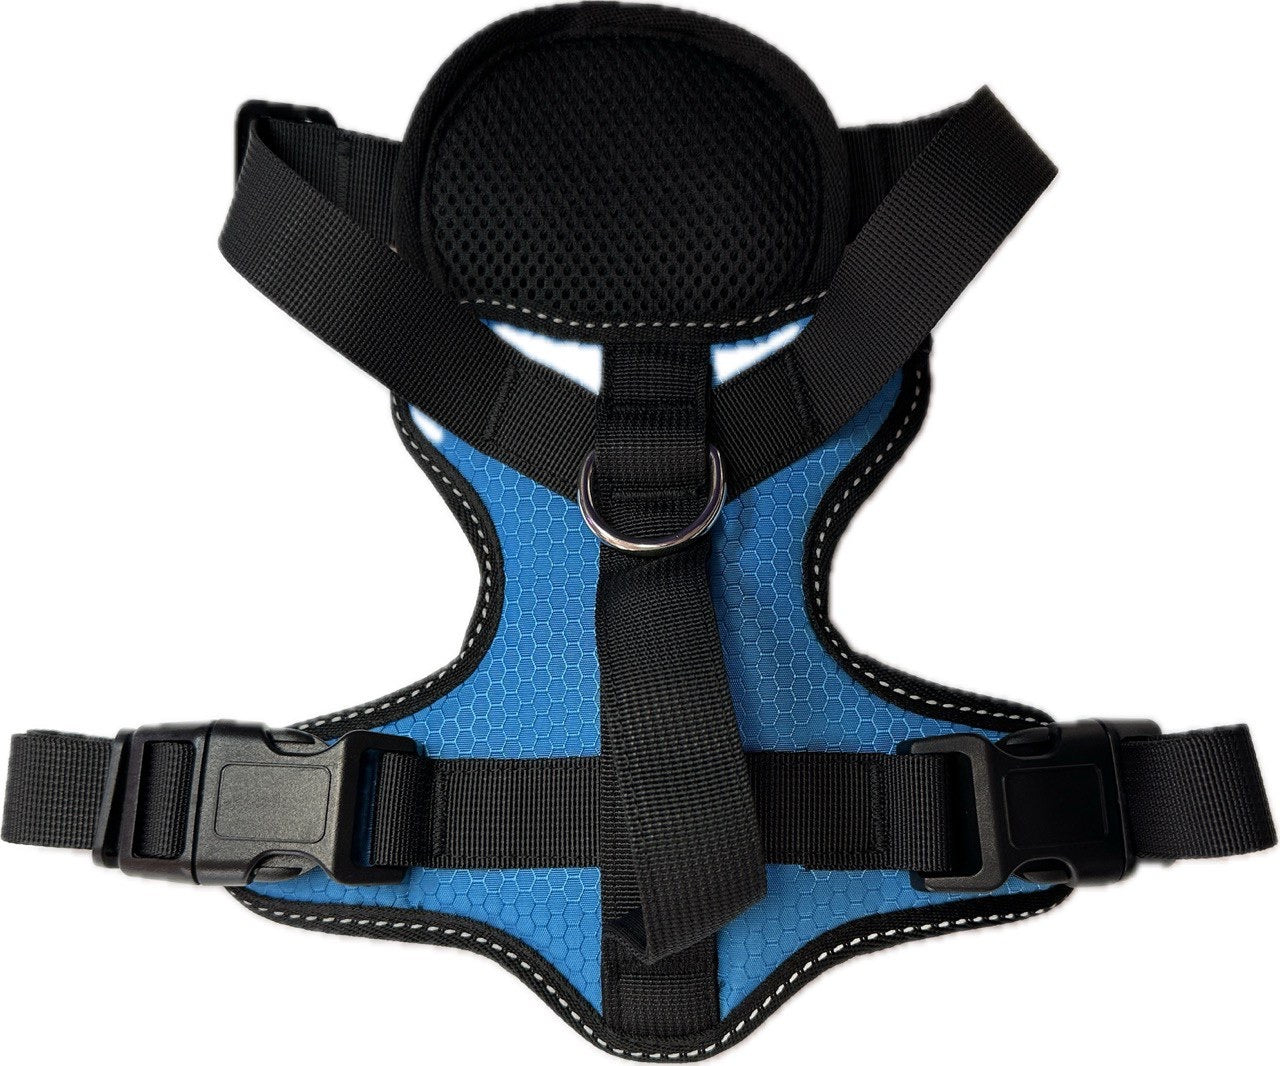 3 in 1 Seatbelt Harness with Front Control